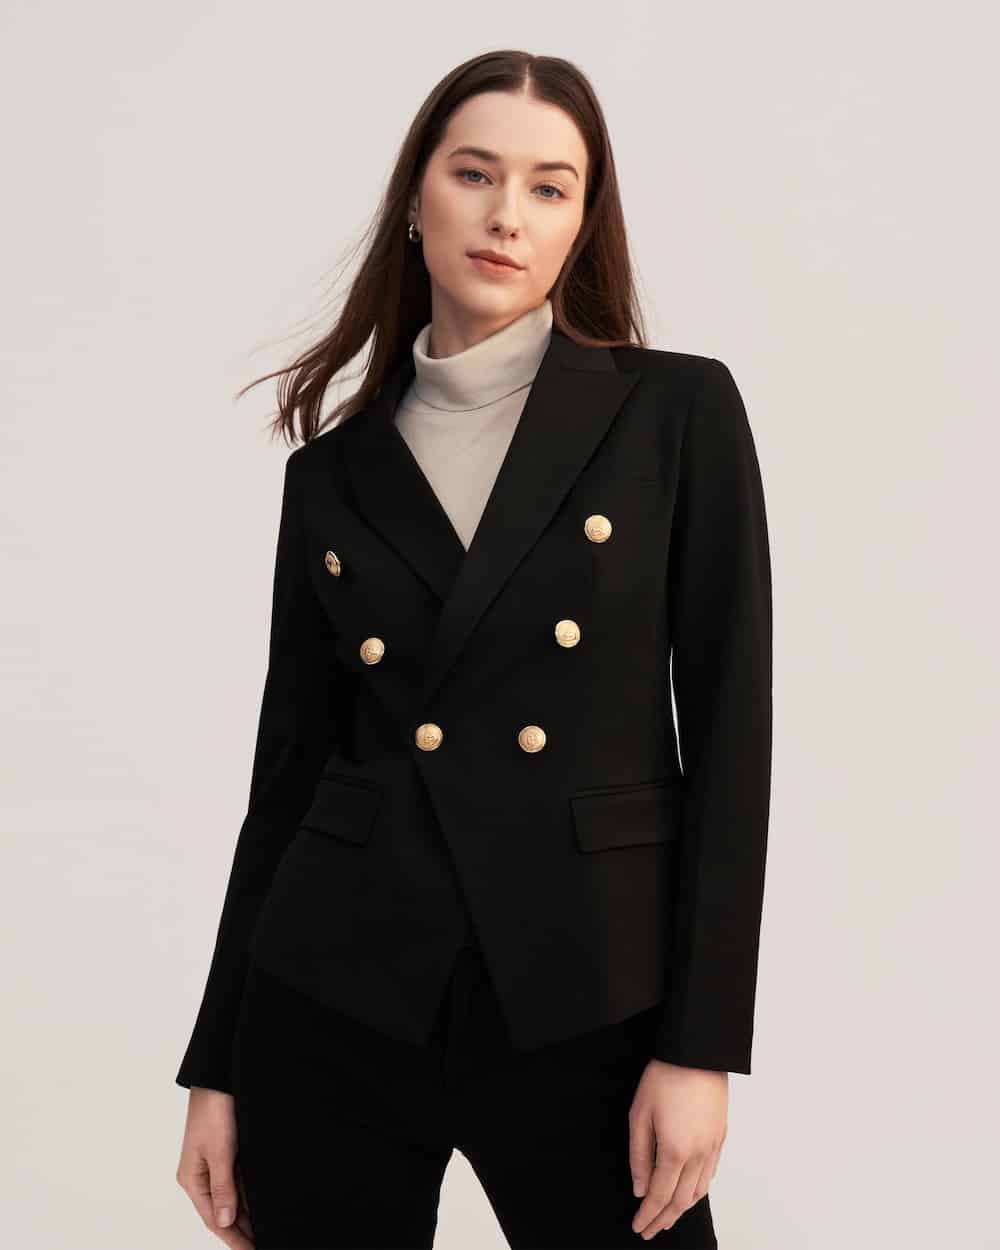 image of a woman wearing a black blazer with gold buttons, and flap pockets over a beige turtleneck